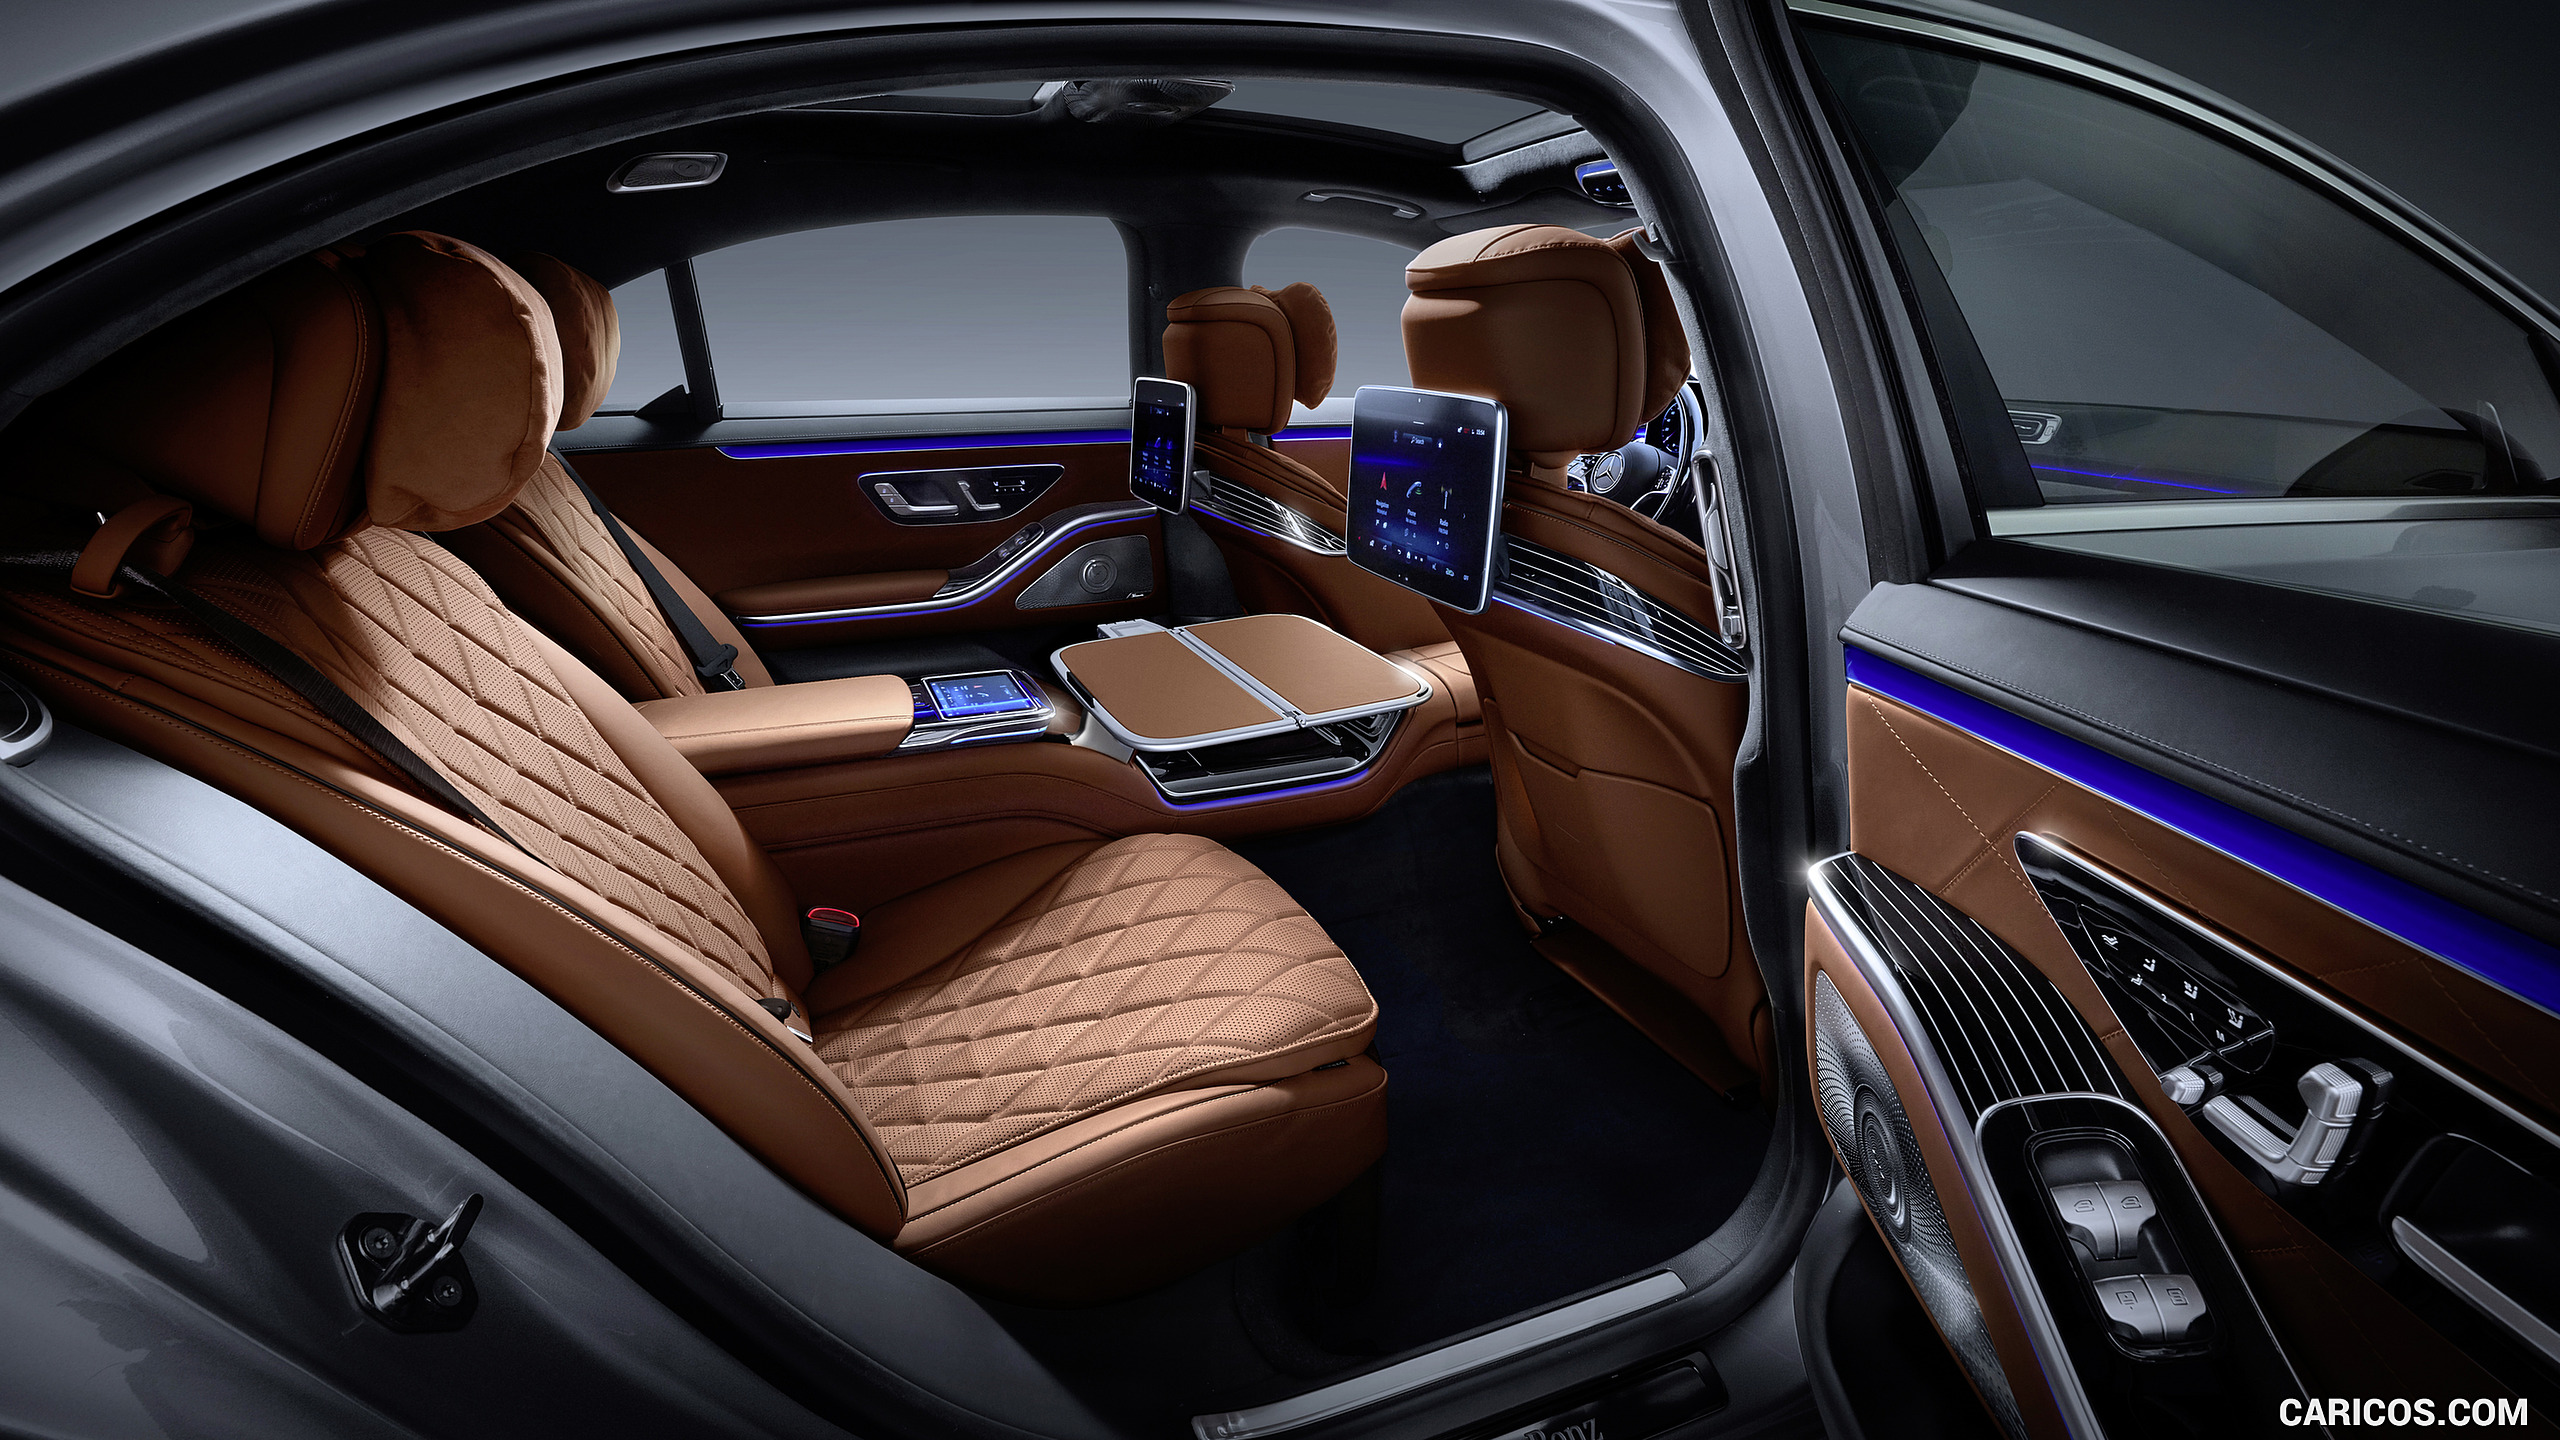 2021 Mercedes-Benz S-Class (Color: Leather Siena Brown) - Interior, Rear Seats, #141 of 316